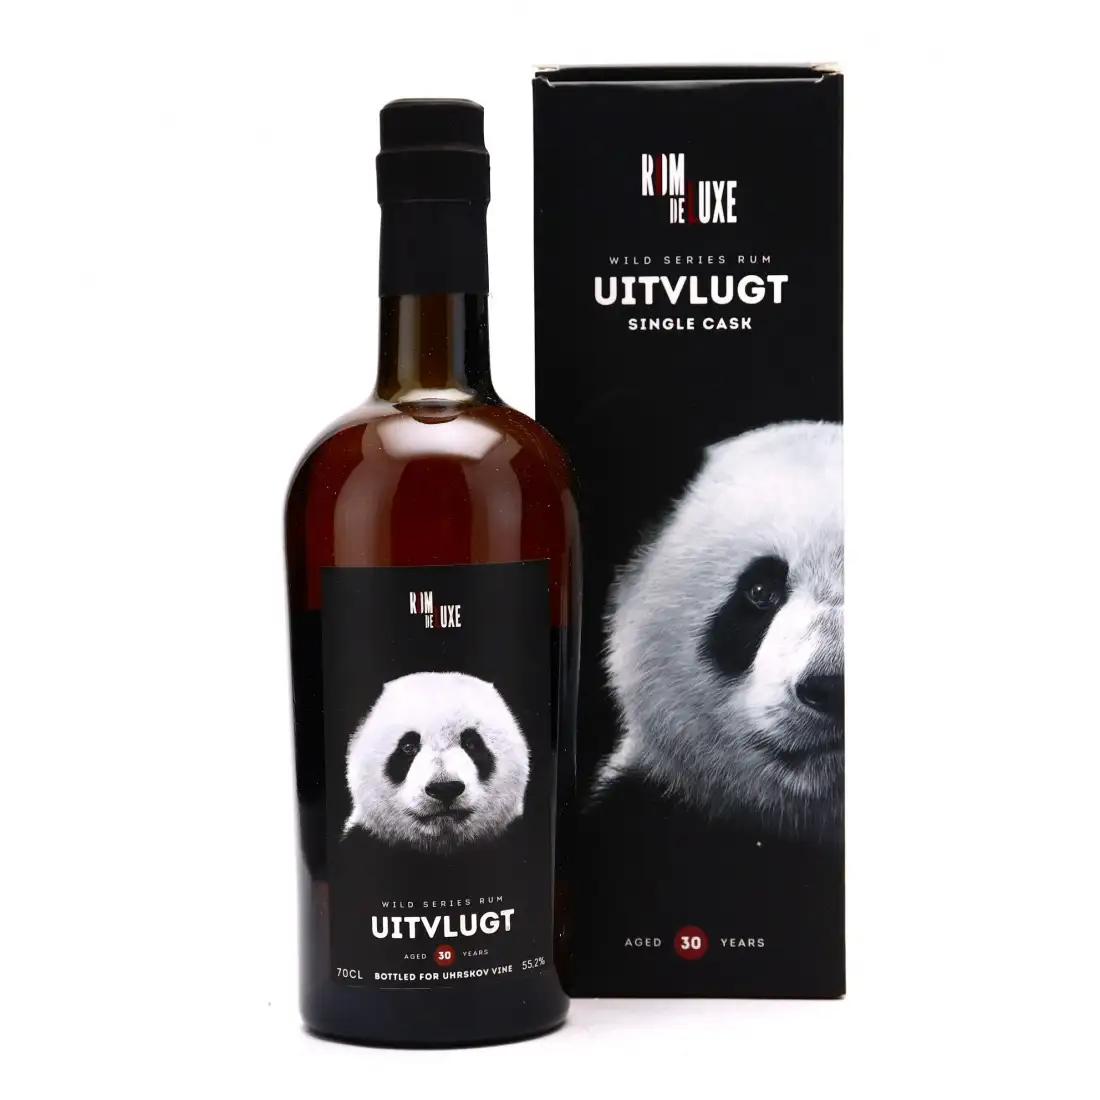 Image of the front of the bottle of the rum Wild Series Rum Uitvlugt No. 19 (Uhrskov Vine) MPM